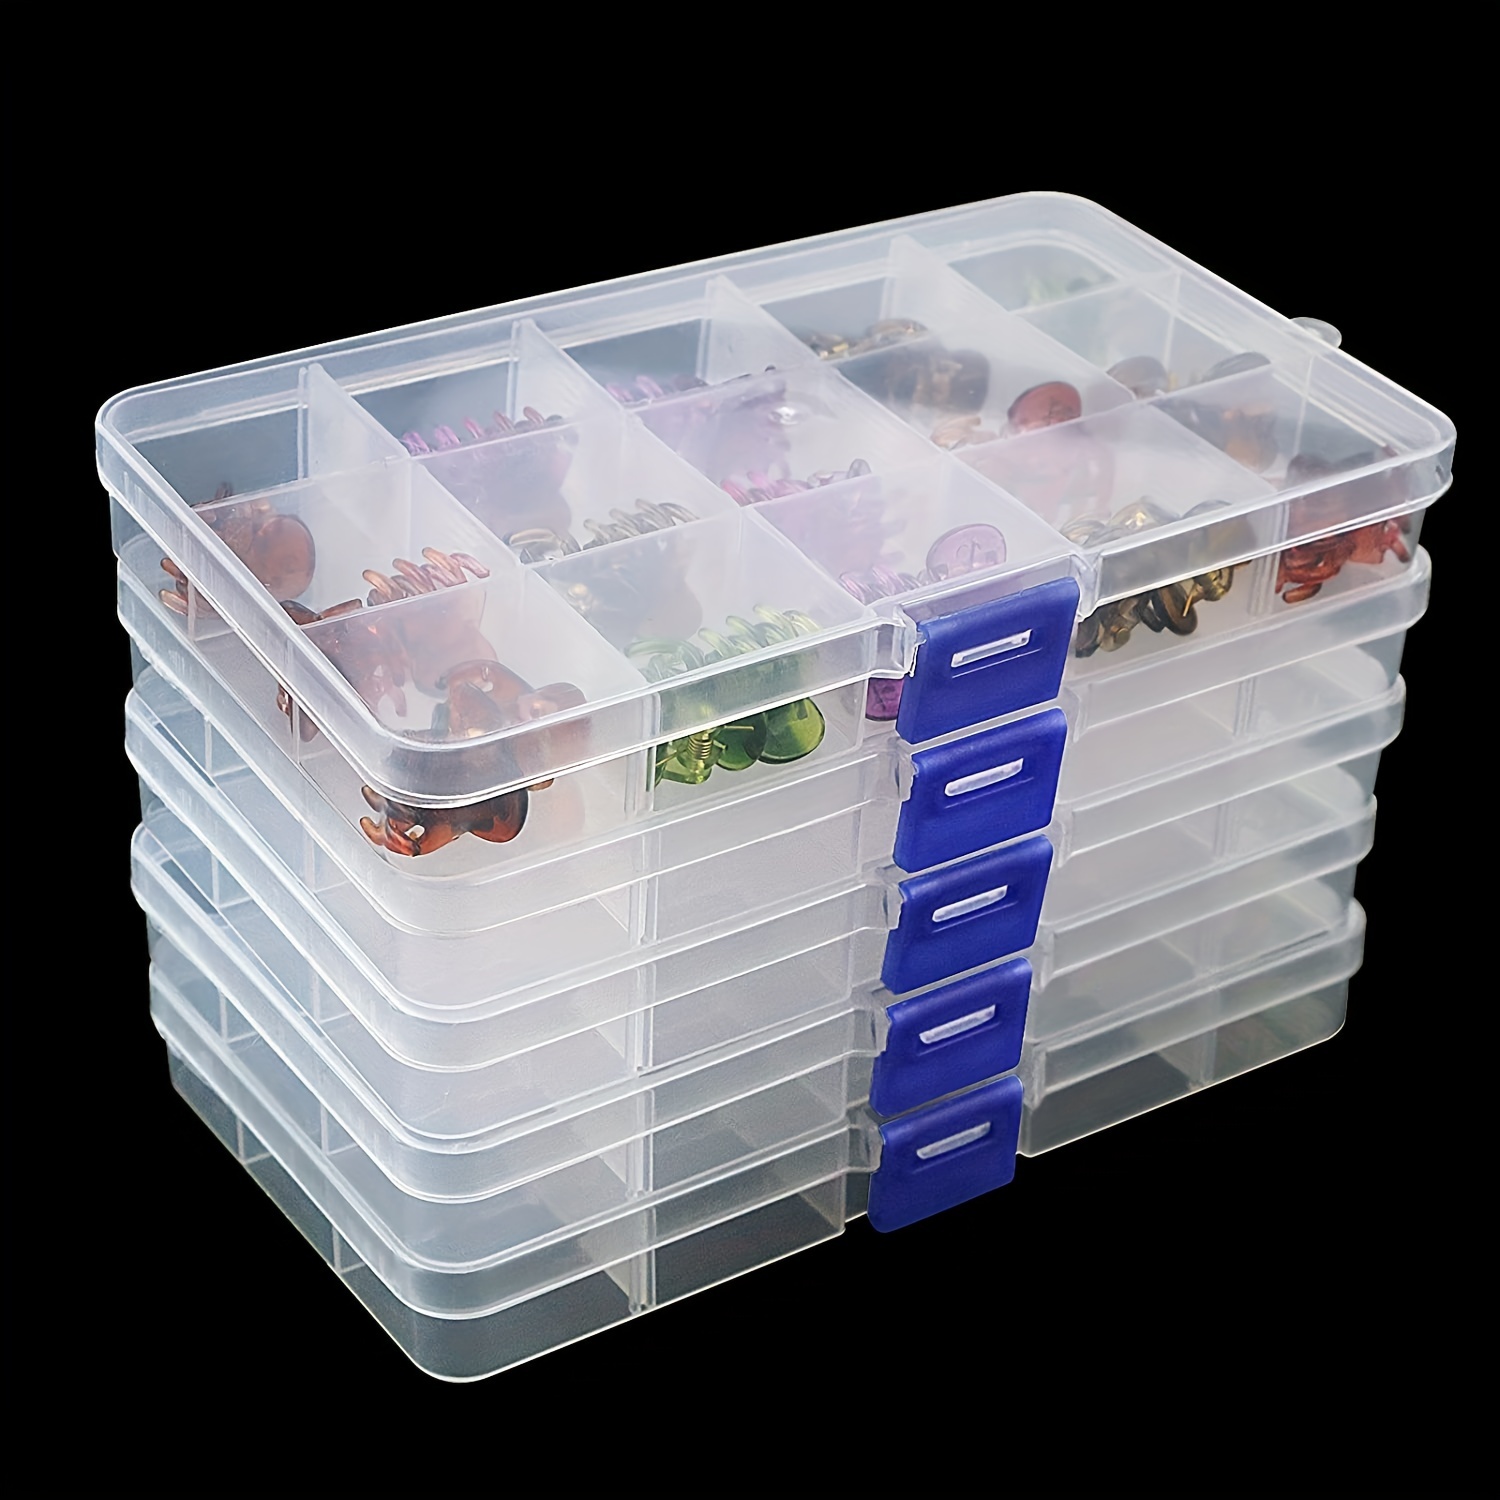 2pcs of Clear Plastic Storage Bead Container Box Case,15 Compartments  Hinged Lid Storage DIY Projects Craft Supplies 150x94mm 